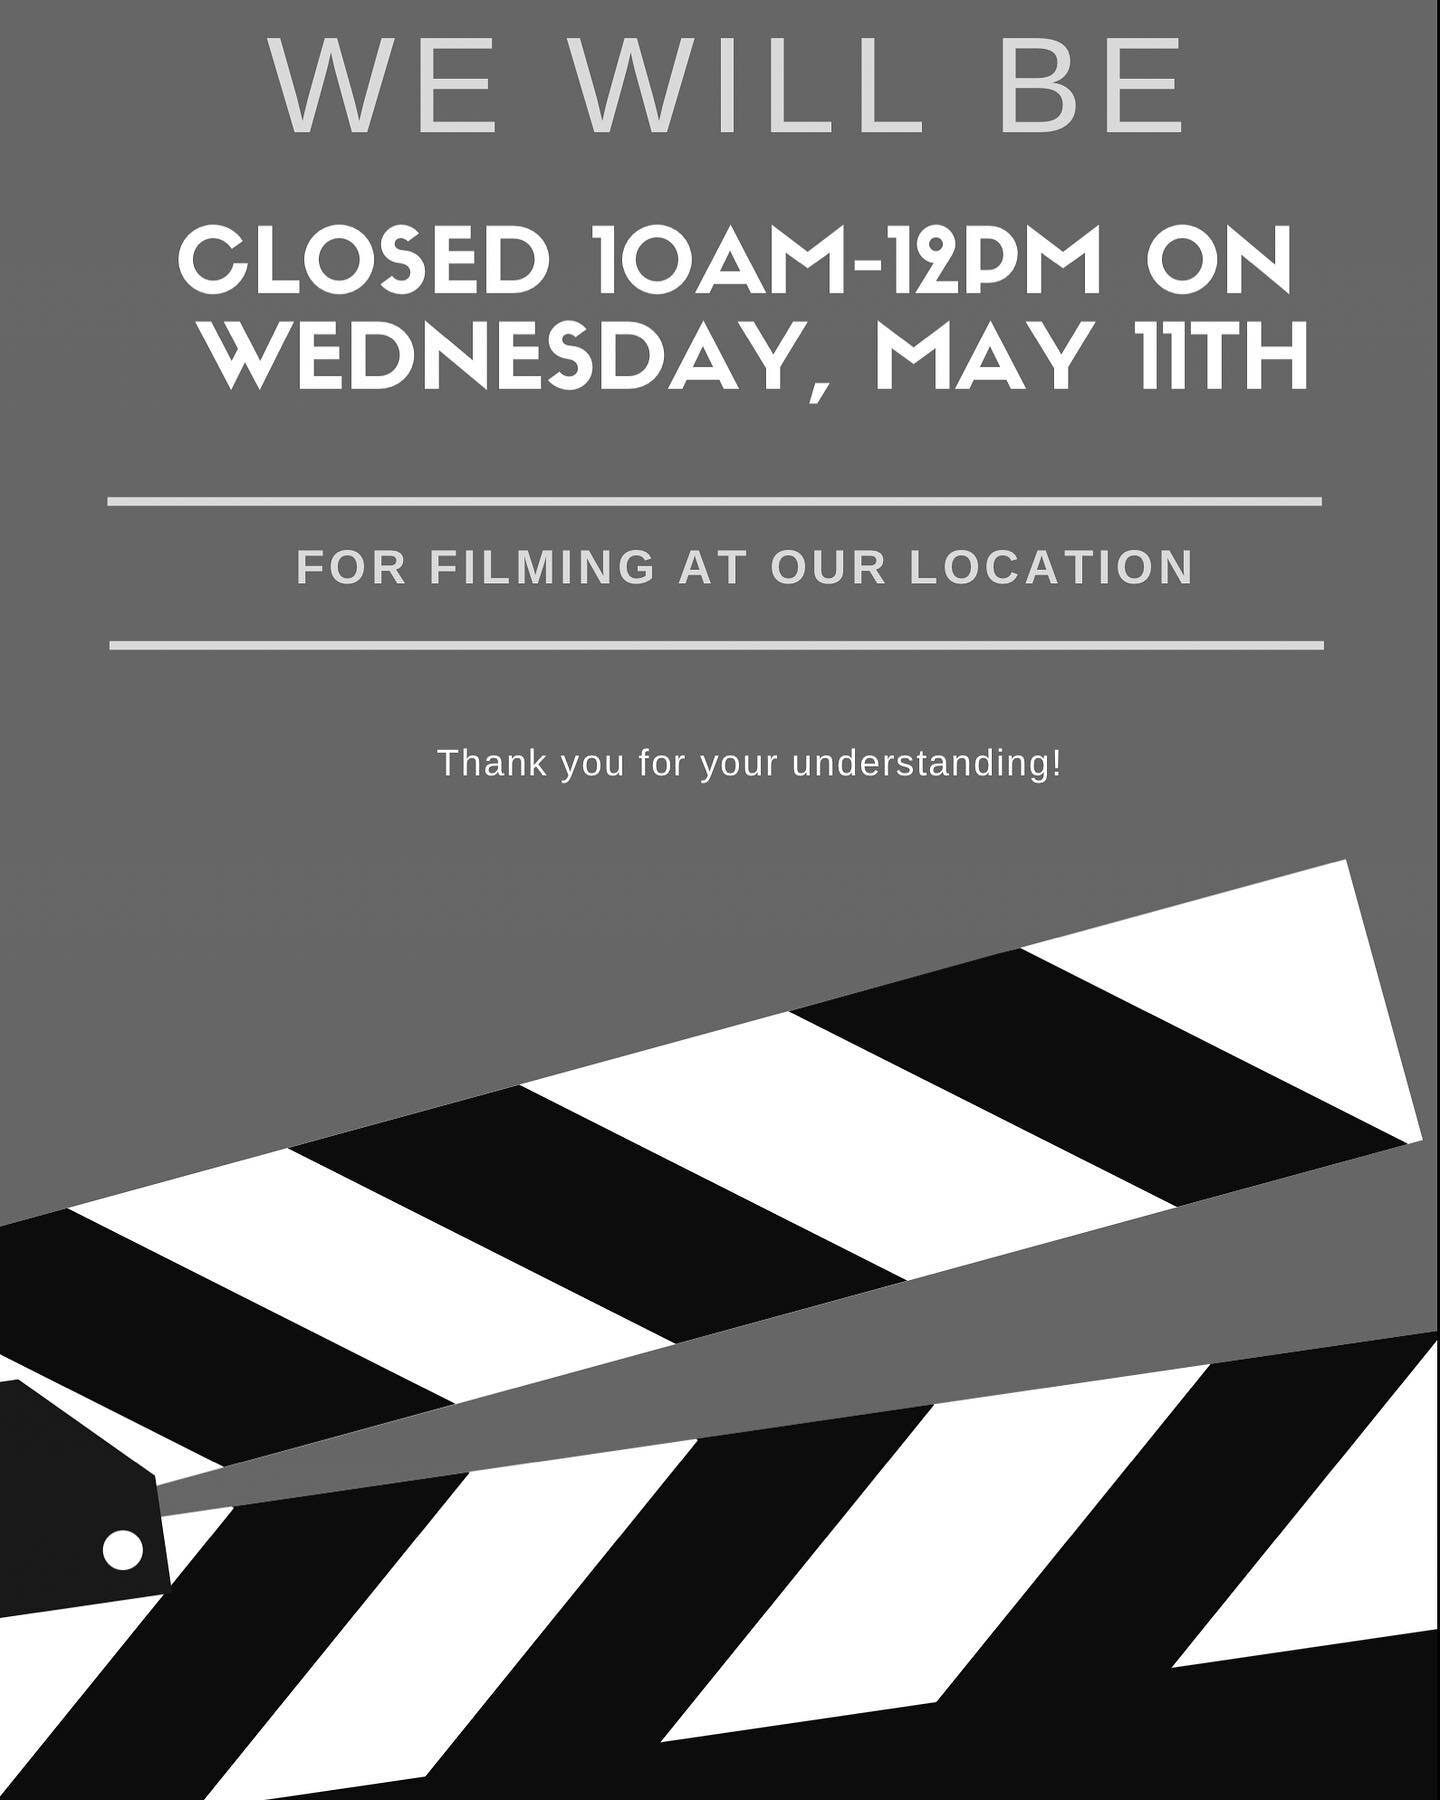 We will be closed for a couple of hours tomorrow for filming at our location. Please leave a message and we will get back to you ASAP! 🎥